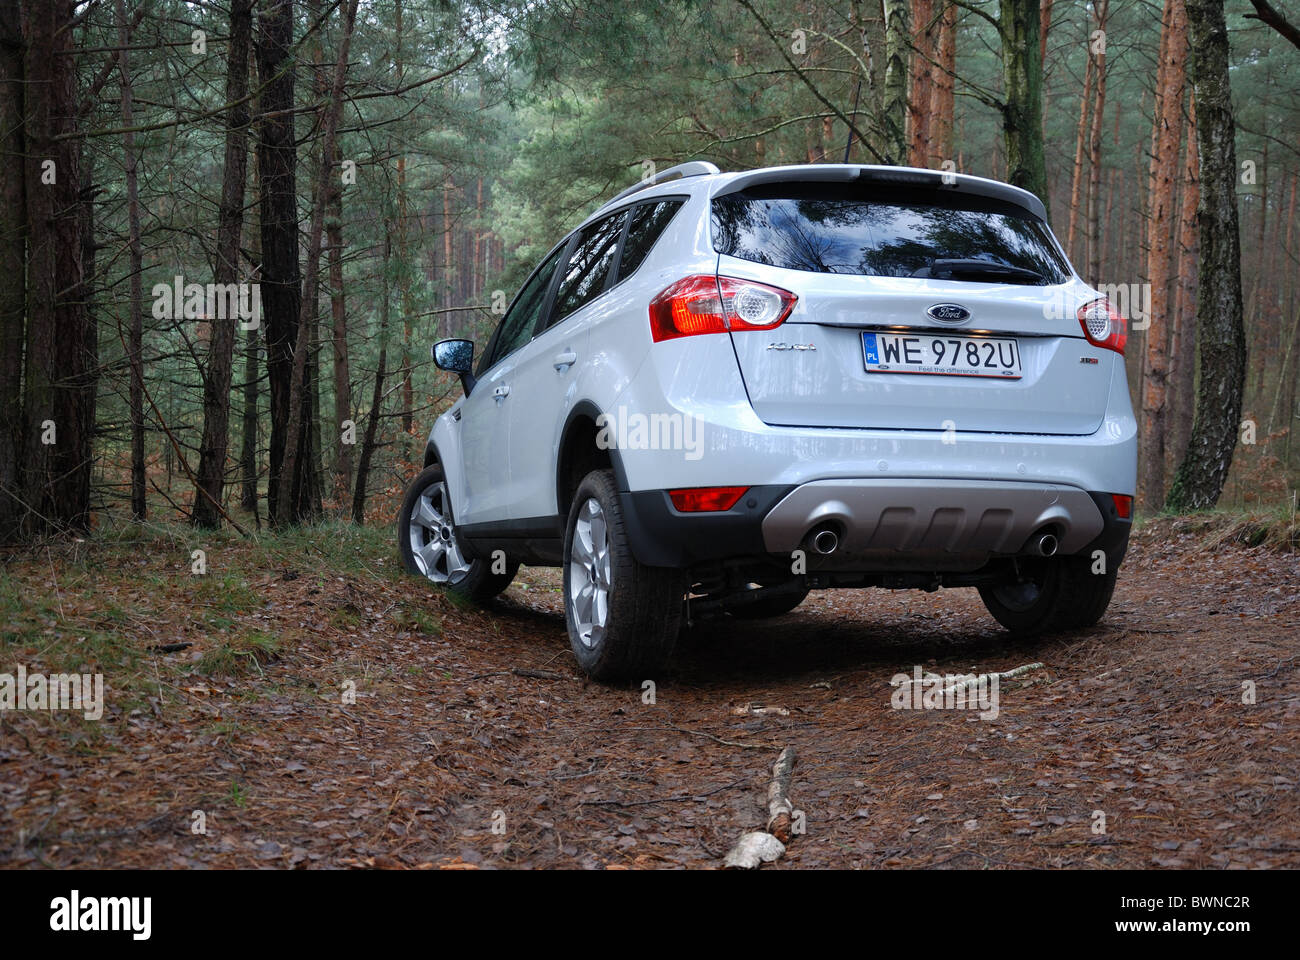 Ford Kuga 2.0 TDCI AWD - MY 2008 - white pearl metallic - five doors (5D) - Popular compact German SUV - in forest Stock Photo